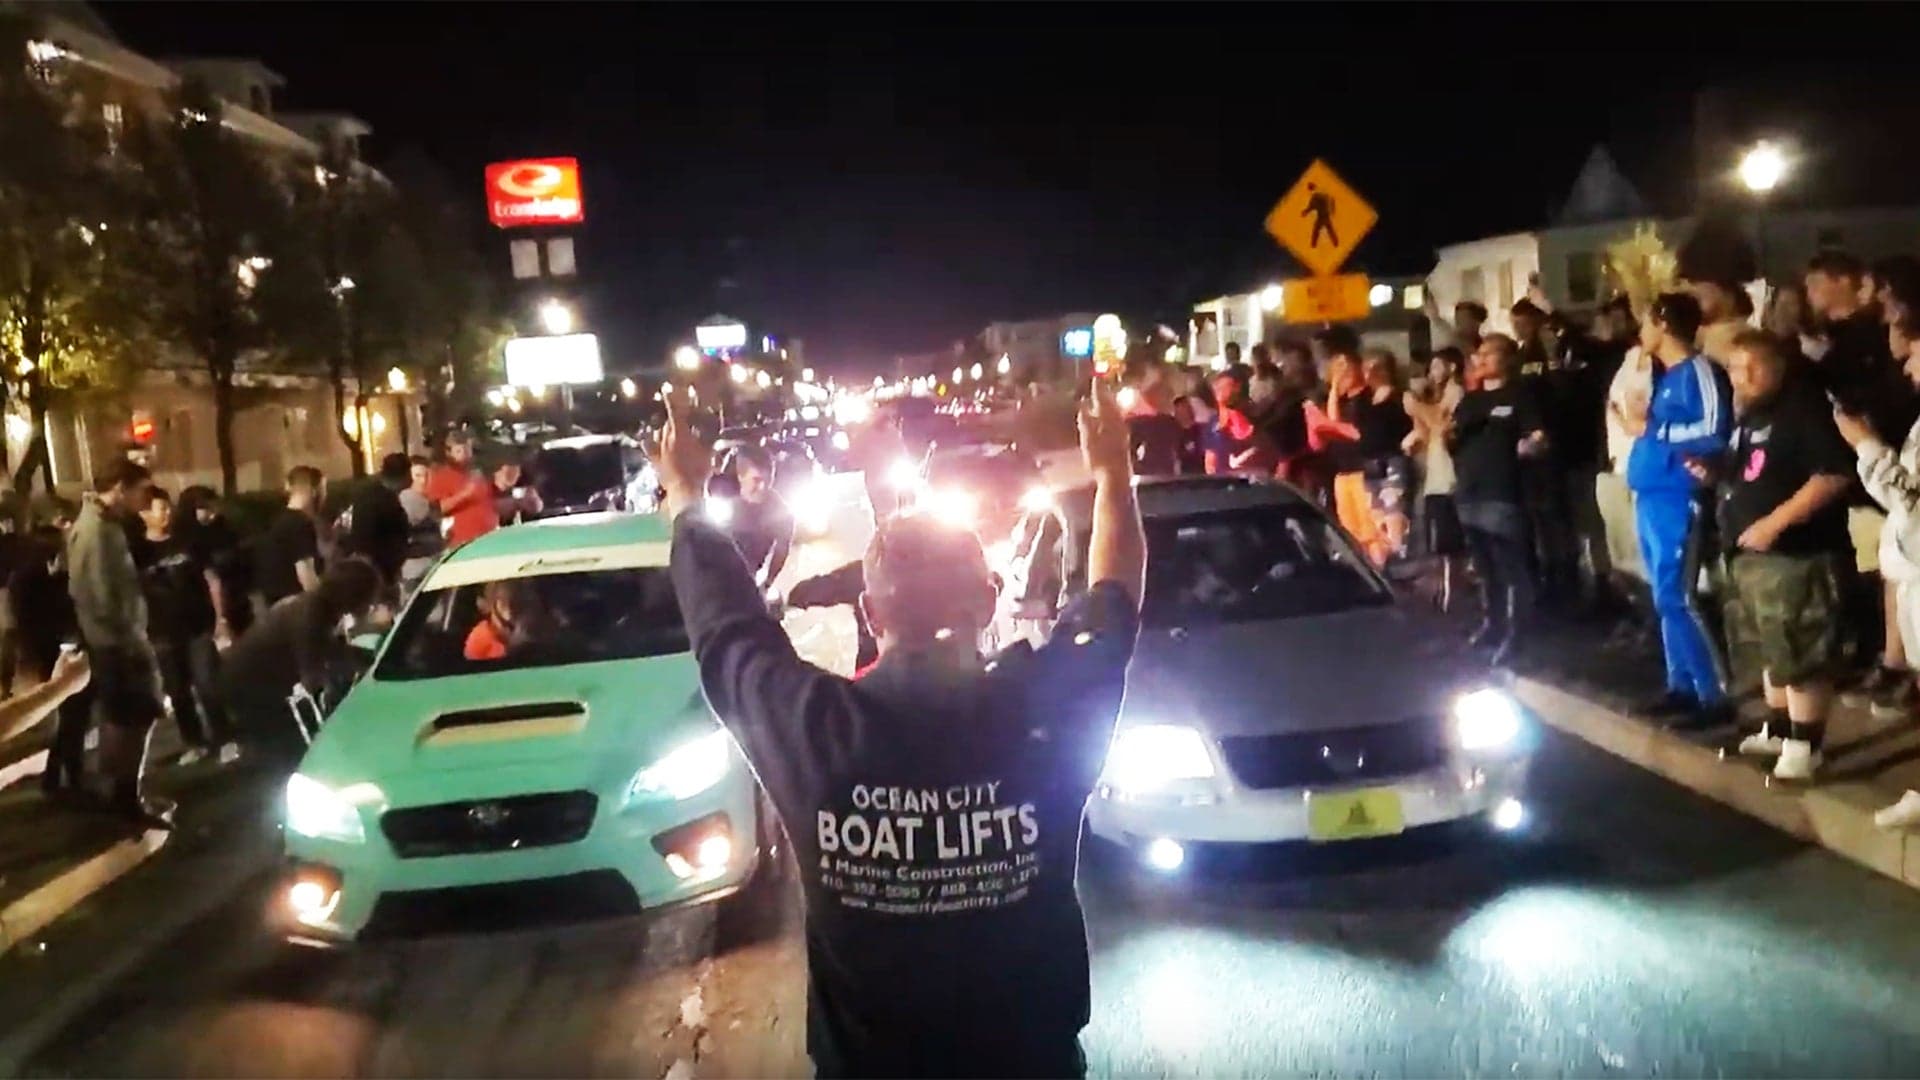 Ocean City Says It’s ‘Under Siege’ By Chaotic, Unsanctioned H2Oi Car Show